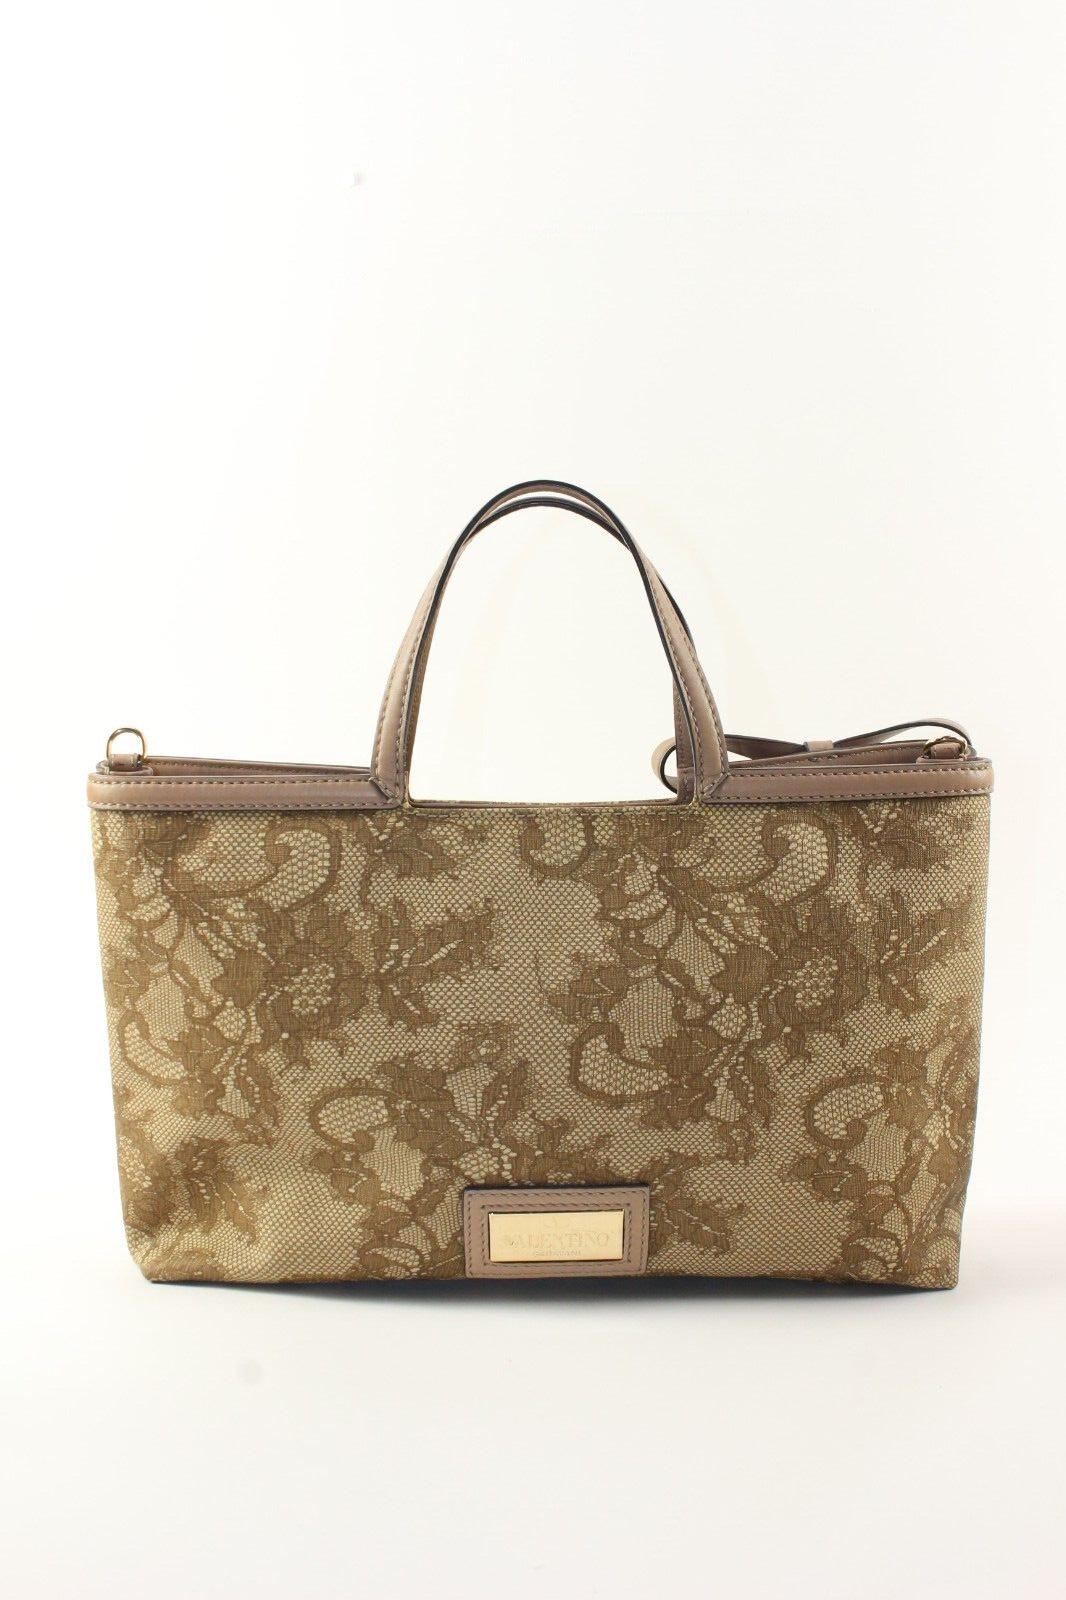 VALENTINO Lace Print 2way Bow Tote 2VAL1226K In Good Condition For Sale In Dix hills, NY